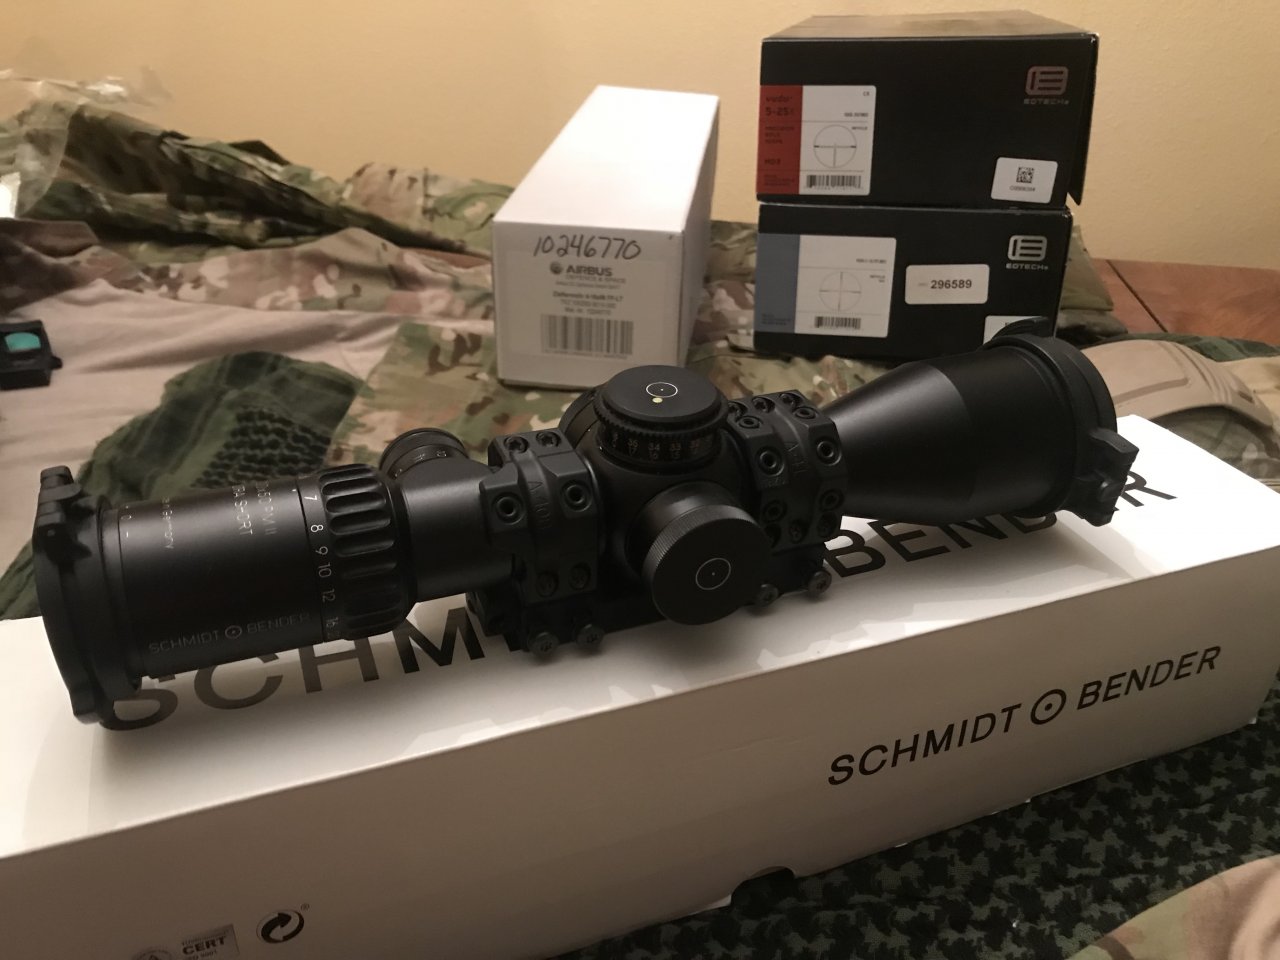 Schmidt & Bender - 5-20X50 PMII LP P4F - Ultra Short with the SPUHR Mount  Its brand new, I bought it for the .224 and now I've decided to part everything With the mount $3150 Without the mount $2850